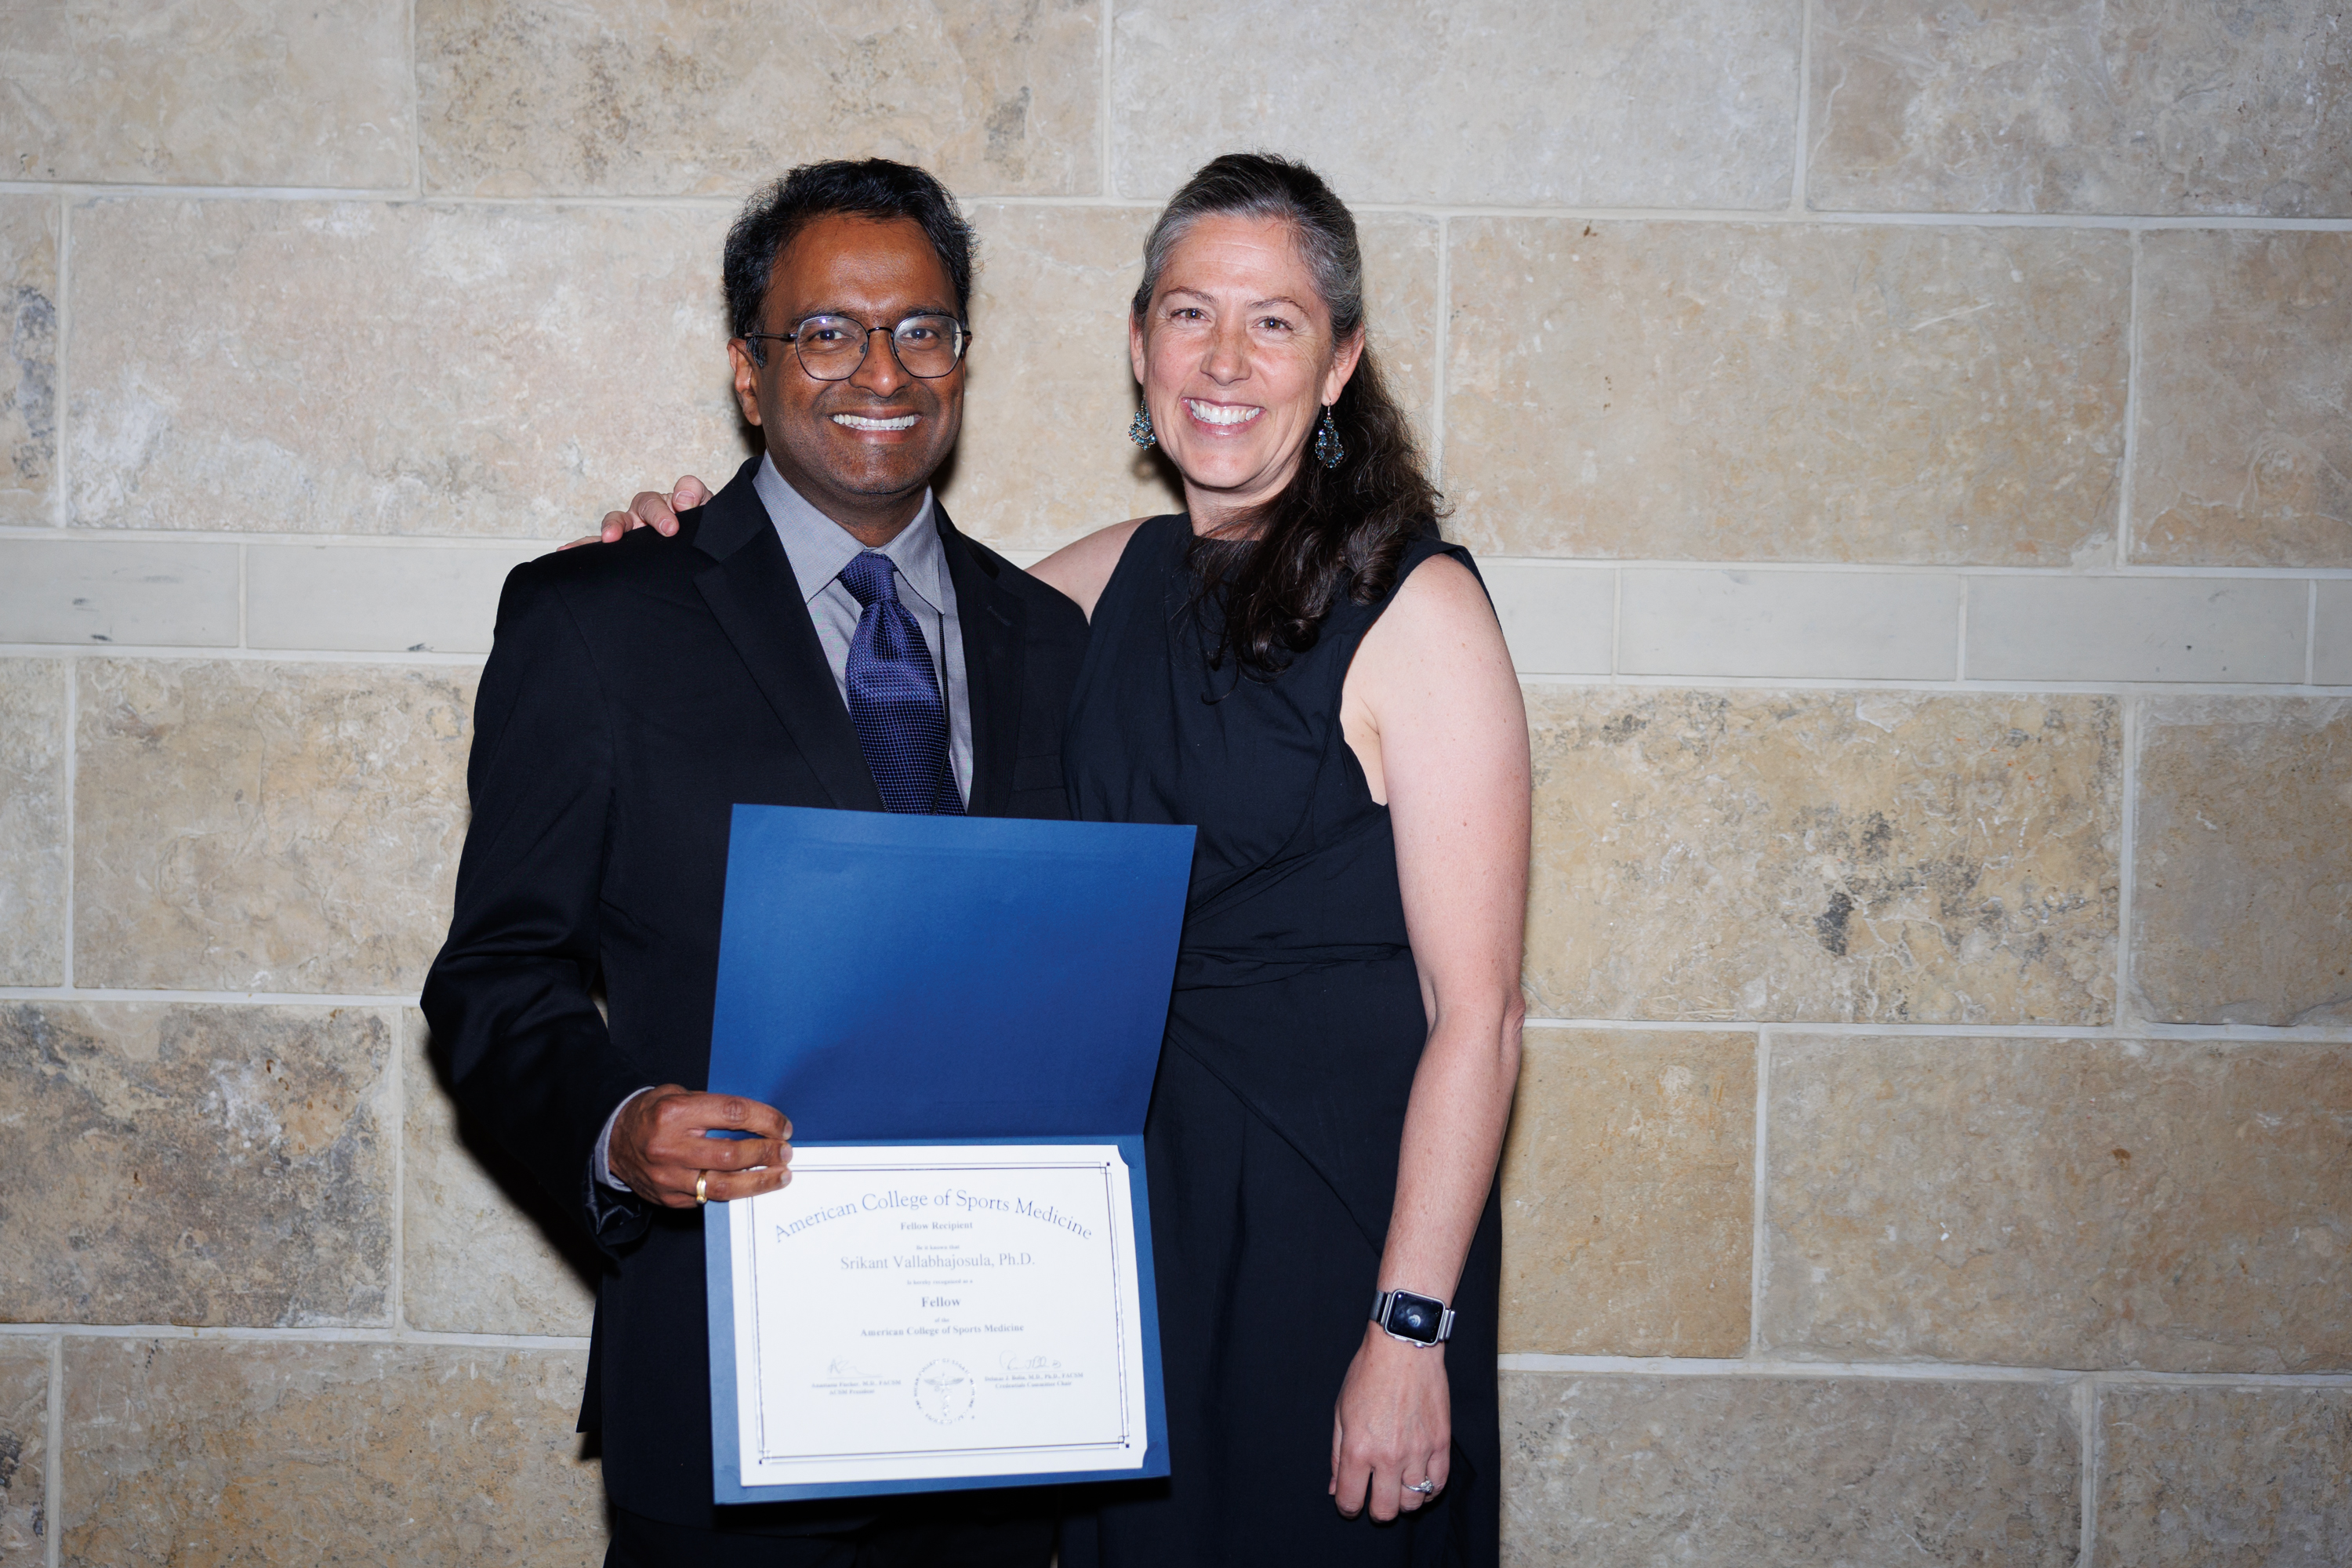 Srikant Vallabhajosula, associate professor of physical therapy education, was named a 2023 Fellow by the American College of Sports Medicine (ACSM) at the organization's annual conference in Denver, Colorado.